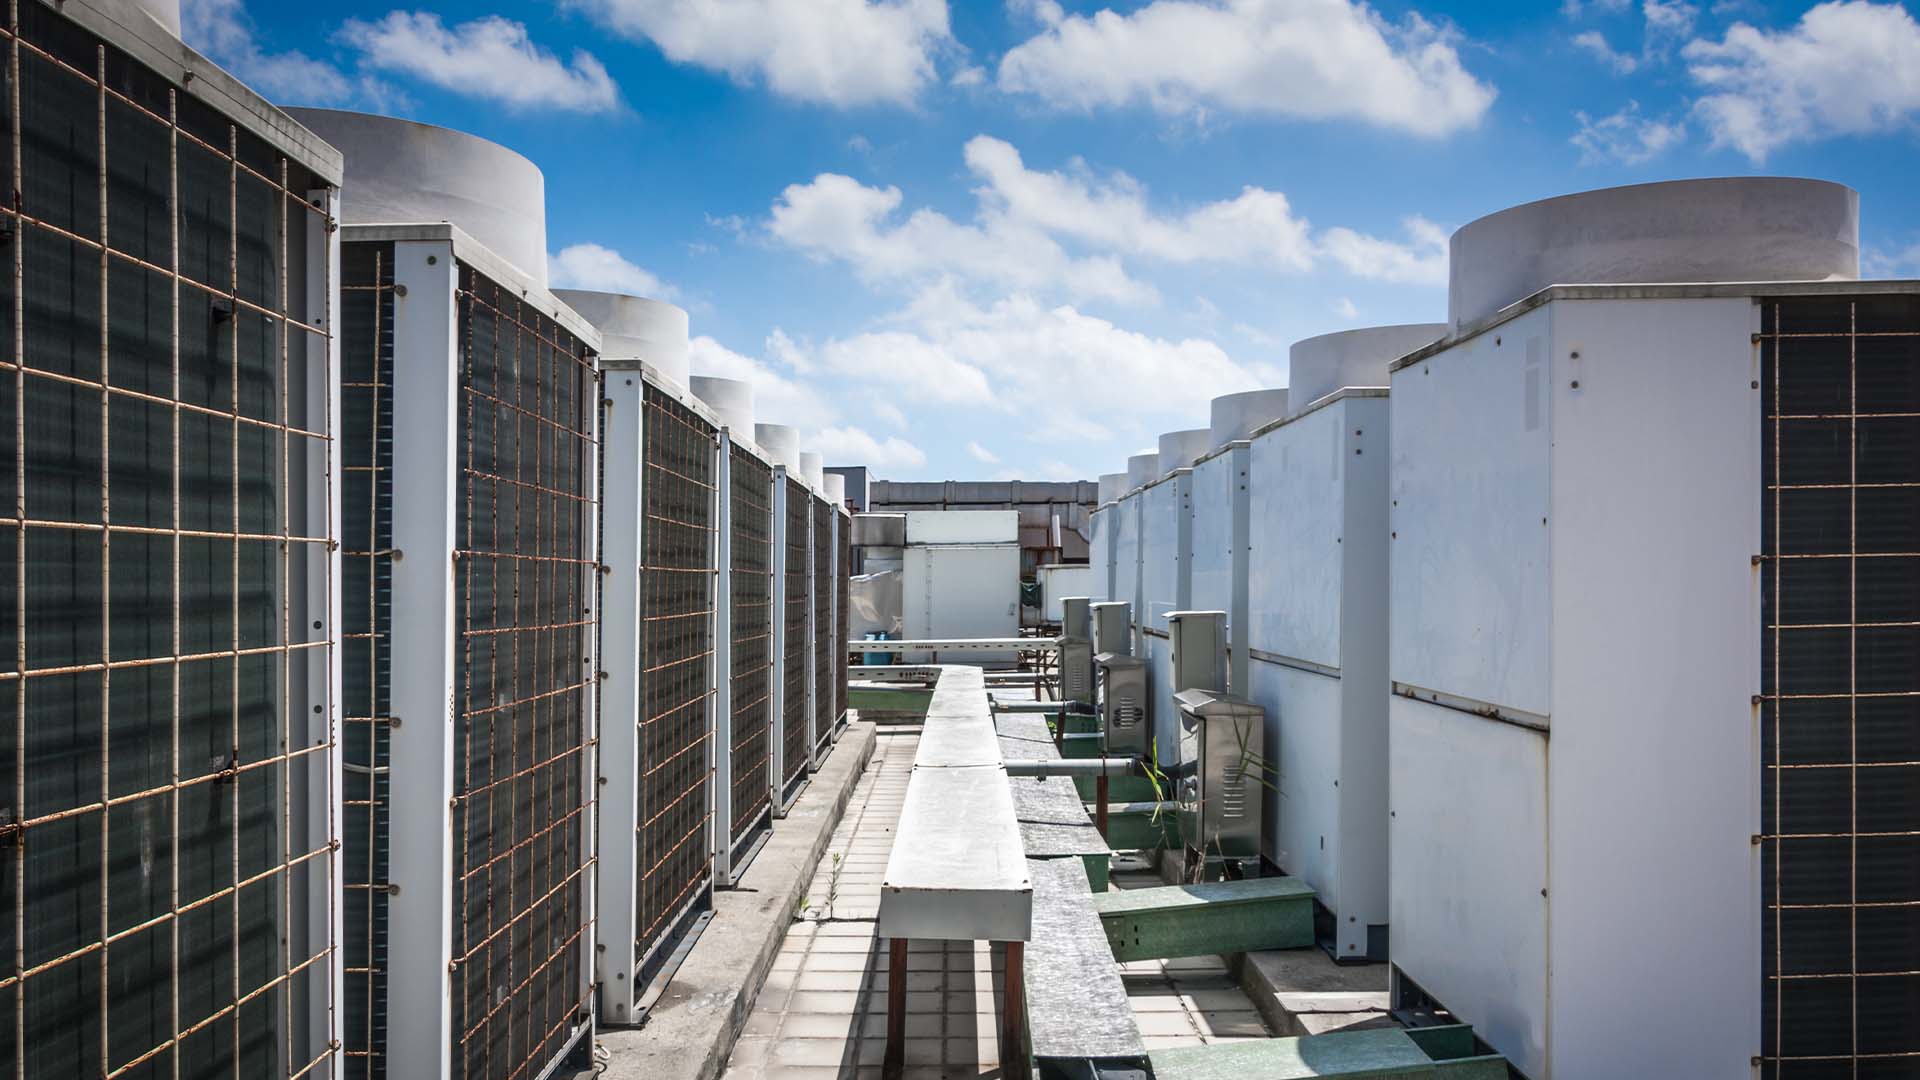 A row of rooftop air conditioning units sit atop a roof